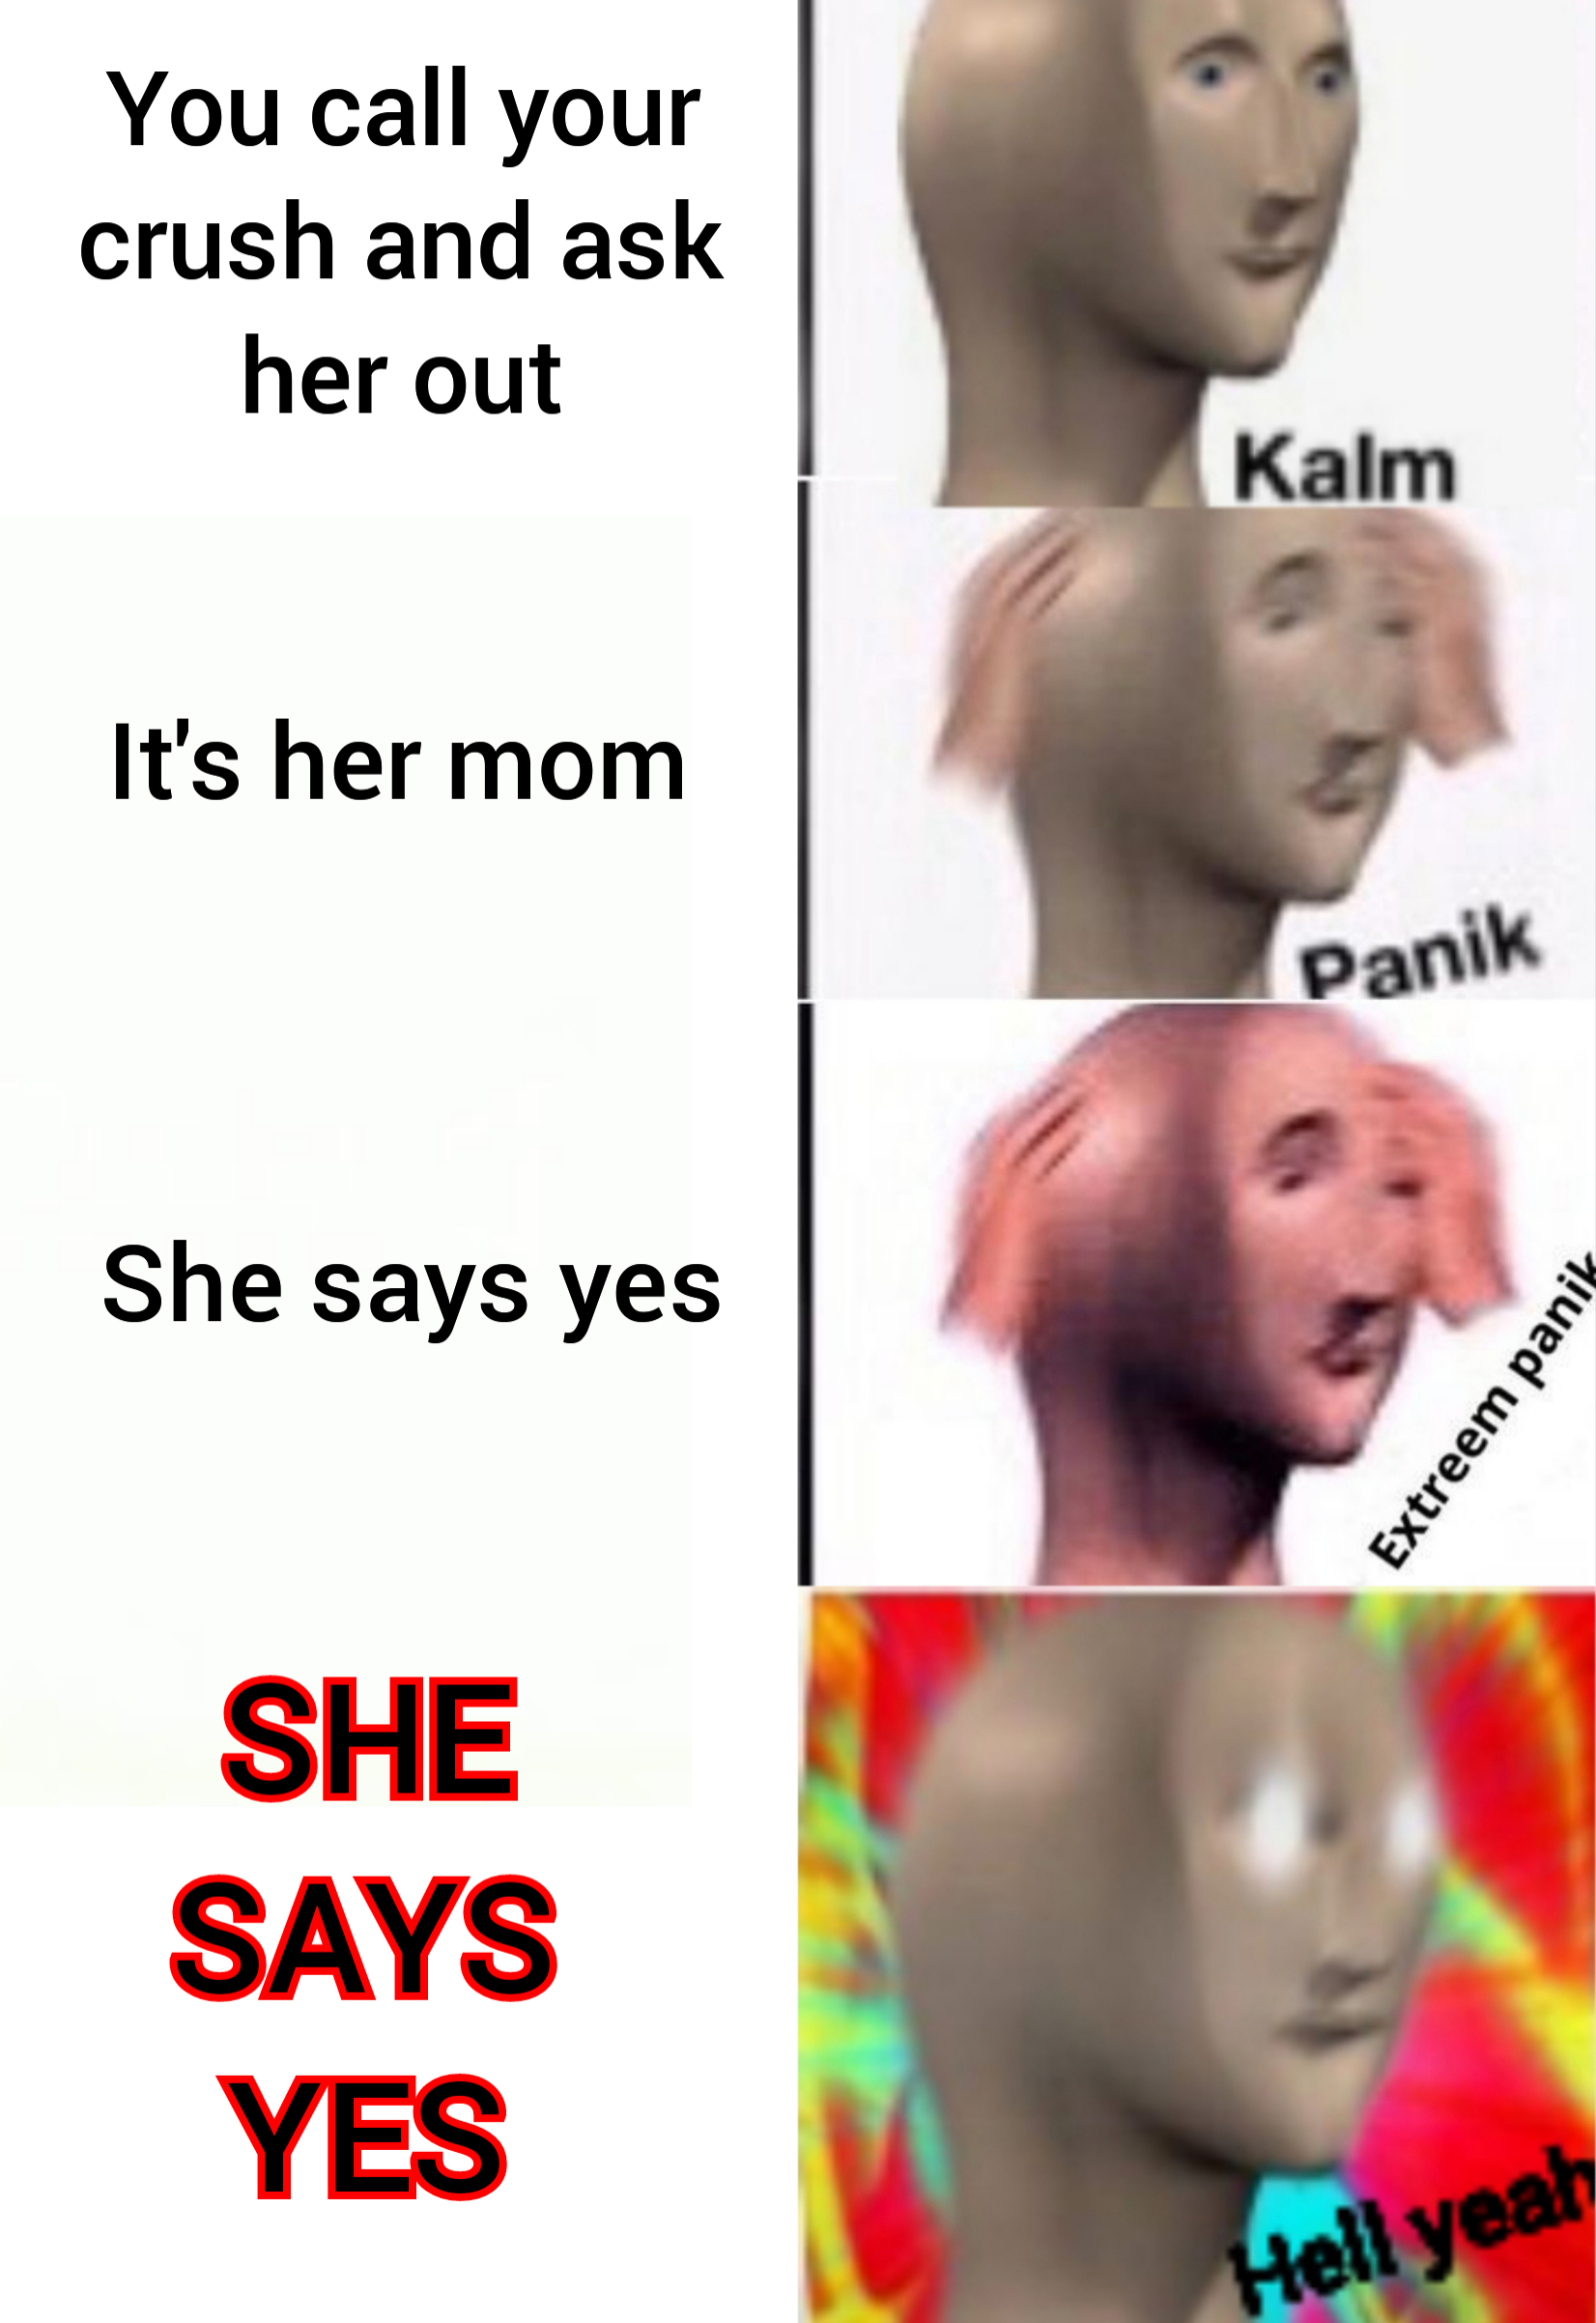 dank memes - panik meme - You call your crush and ask her out Kalm It's her mom Panik She says yes Extreem panil She Says Yes Hell yeah